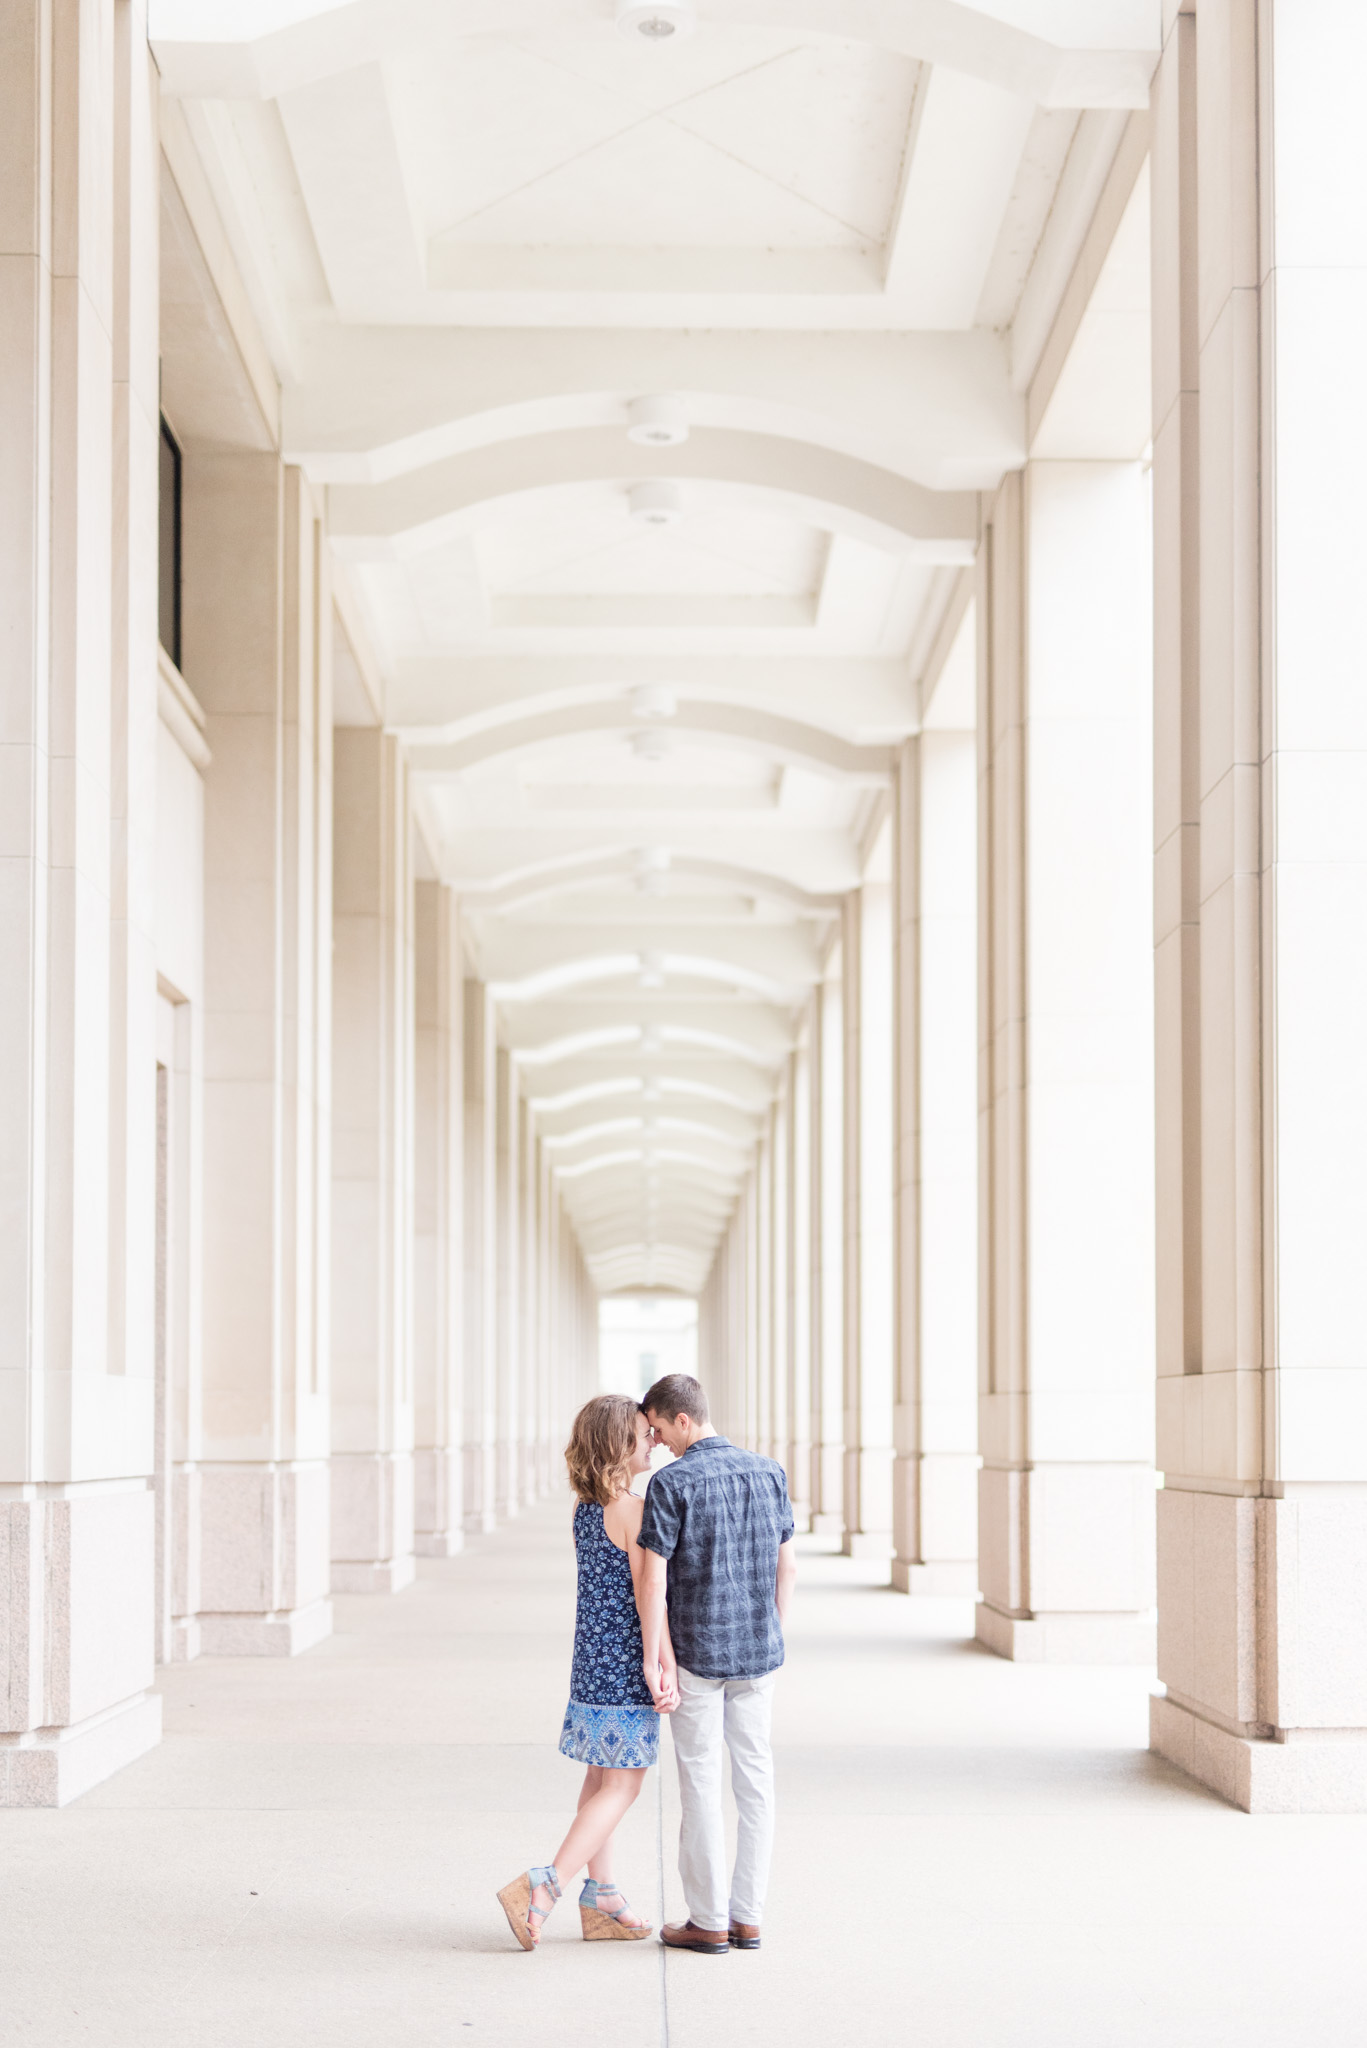 Couple leans in for kiss under columns.